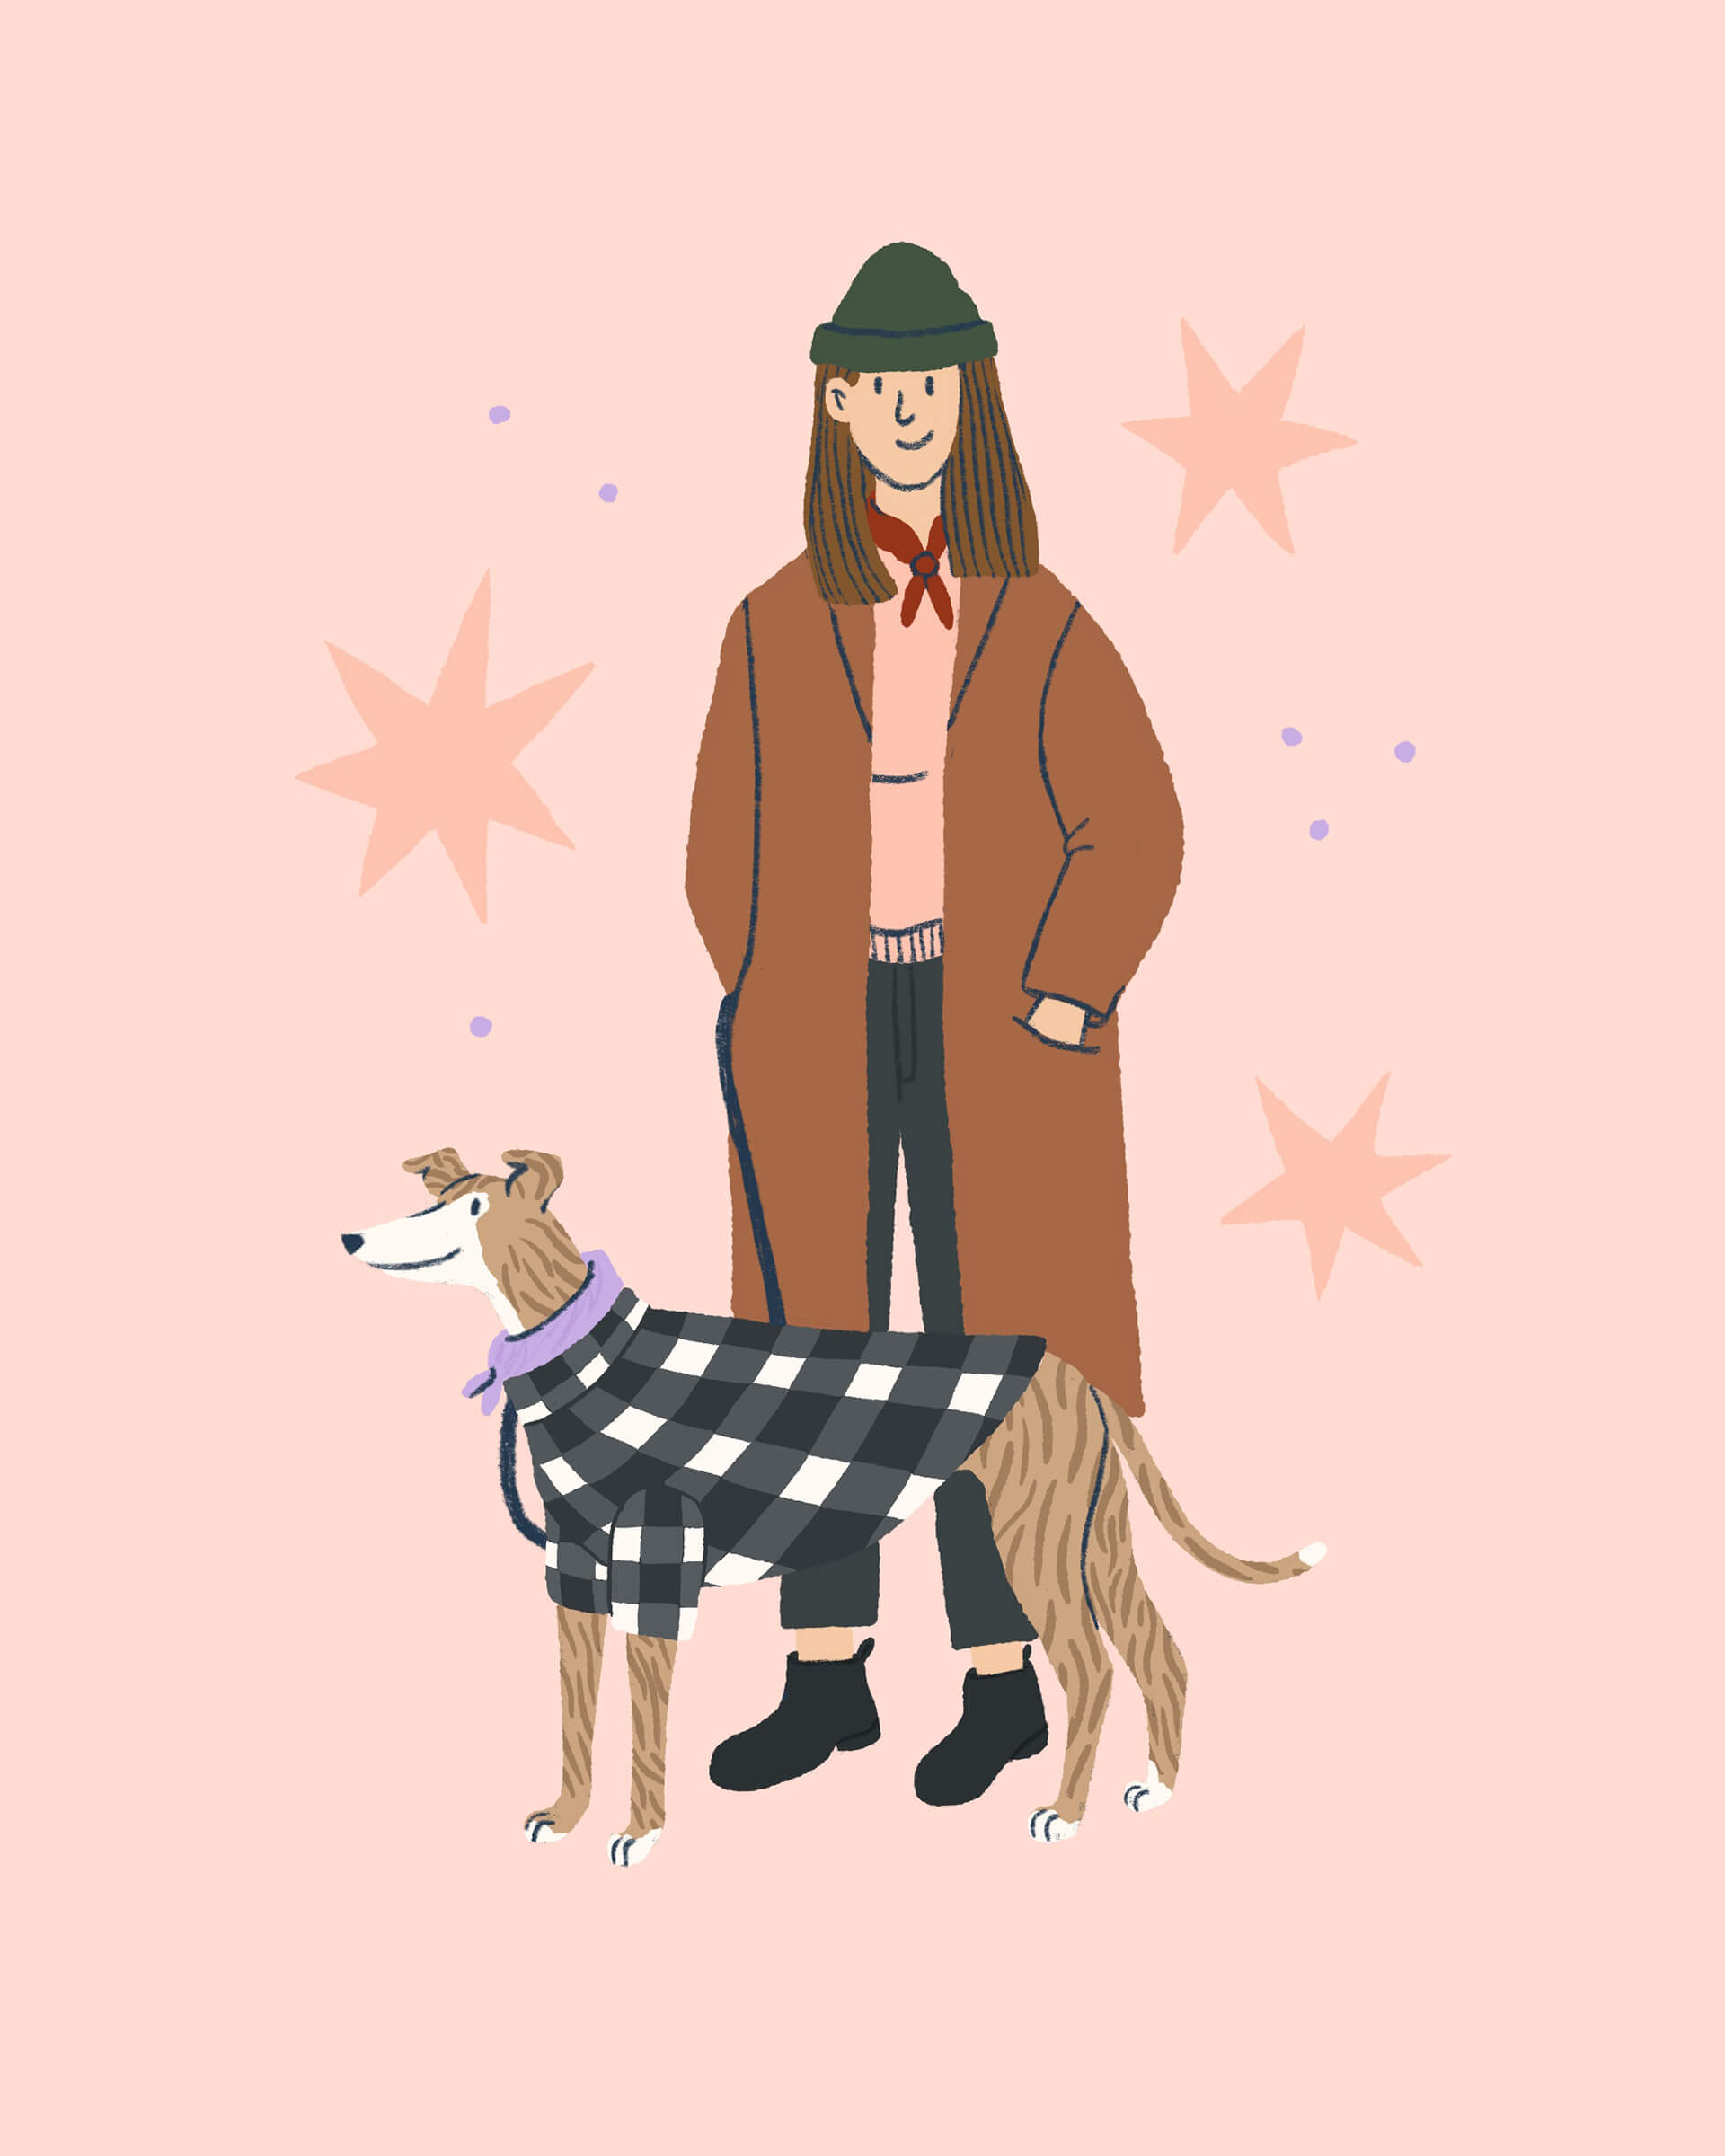 An illustration of a girl in a winter coat and beanie standing with her hands in her pockets. A greyhound in a plaid sweater is standing in front of her.